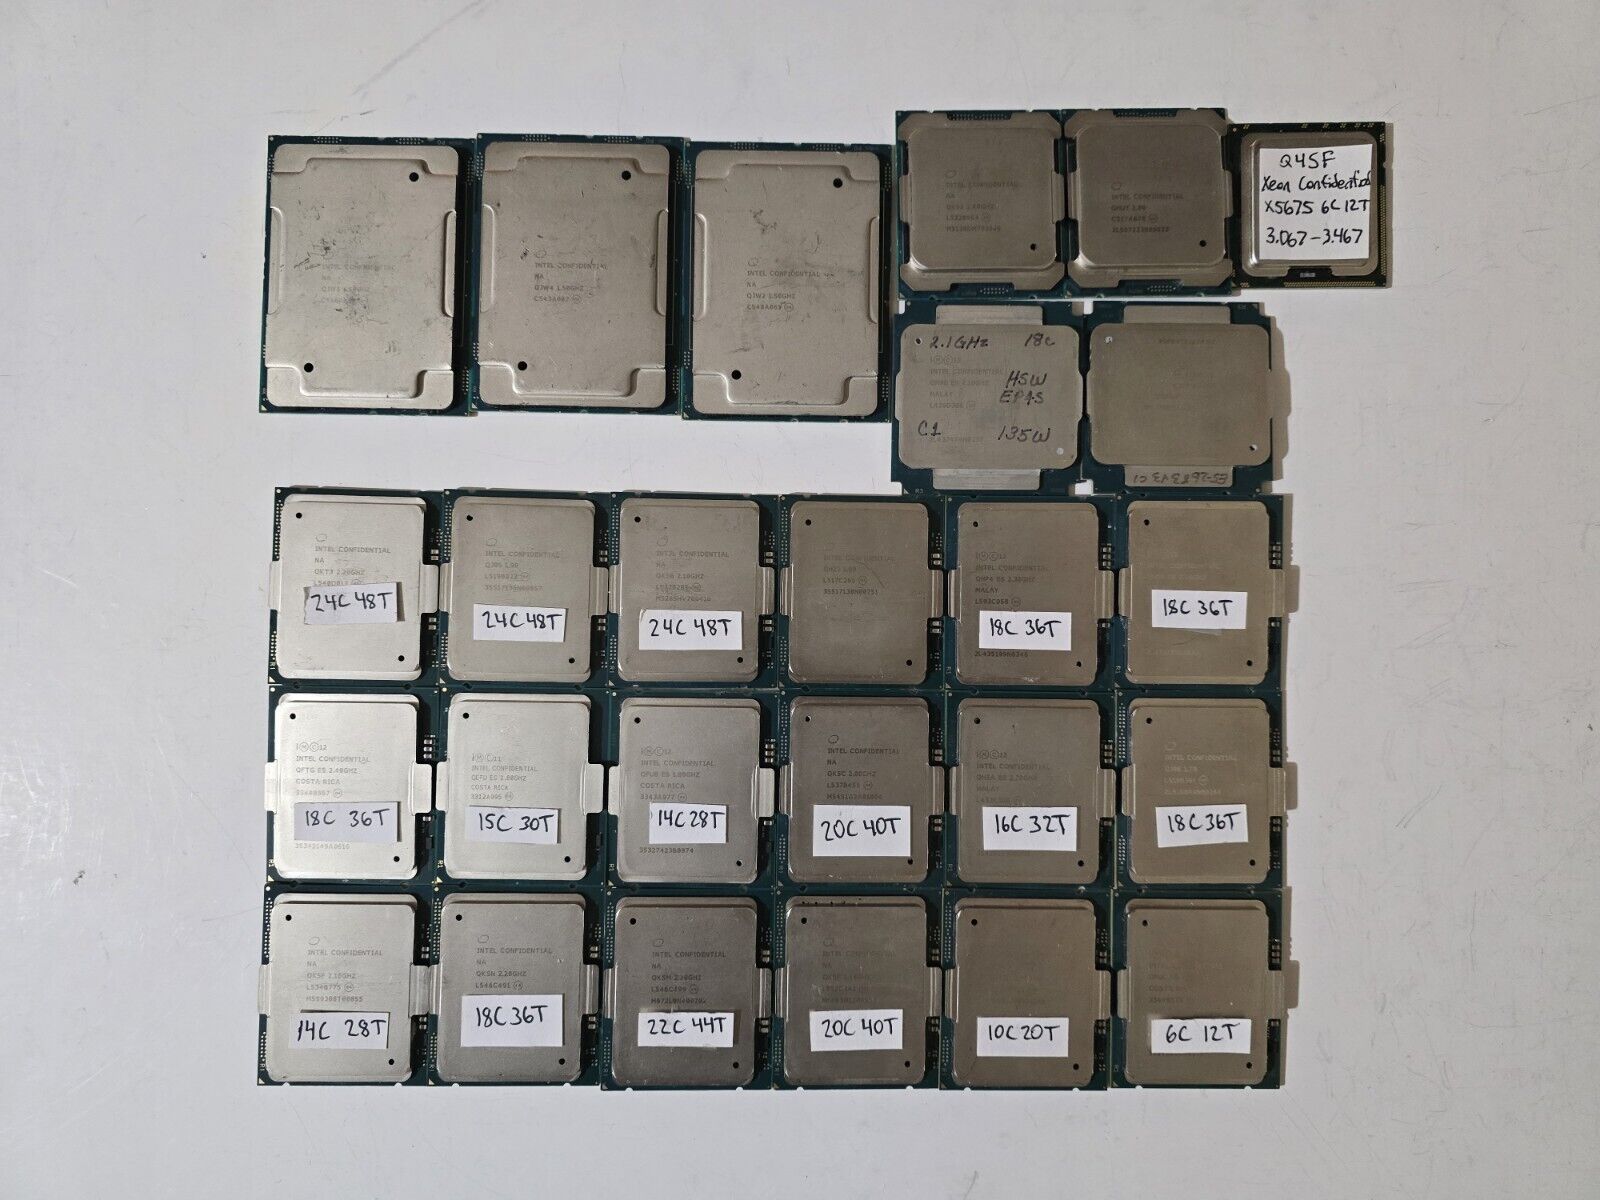 Lot of 26 - Intel ES Qualification CPUs Processors for Collection UNTESTED